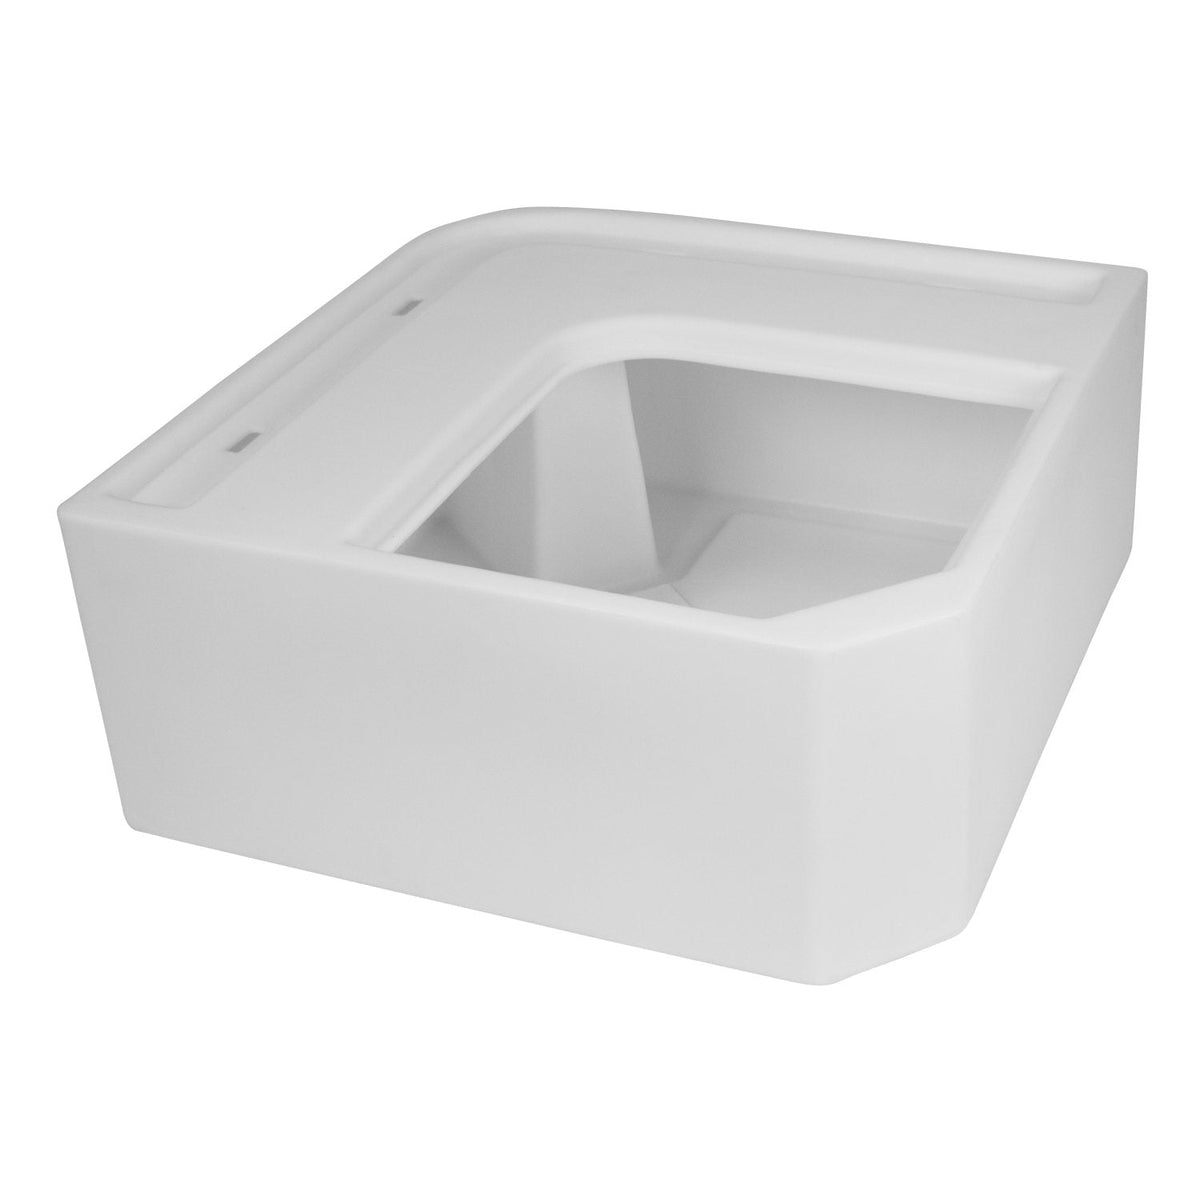 Wise Not Qualified for Free Shipping Wise Deluxe Series Pontoon Radium Corner Section Base White #8WD133-1B-204